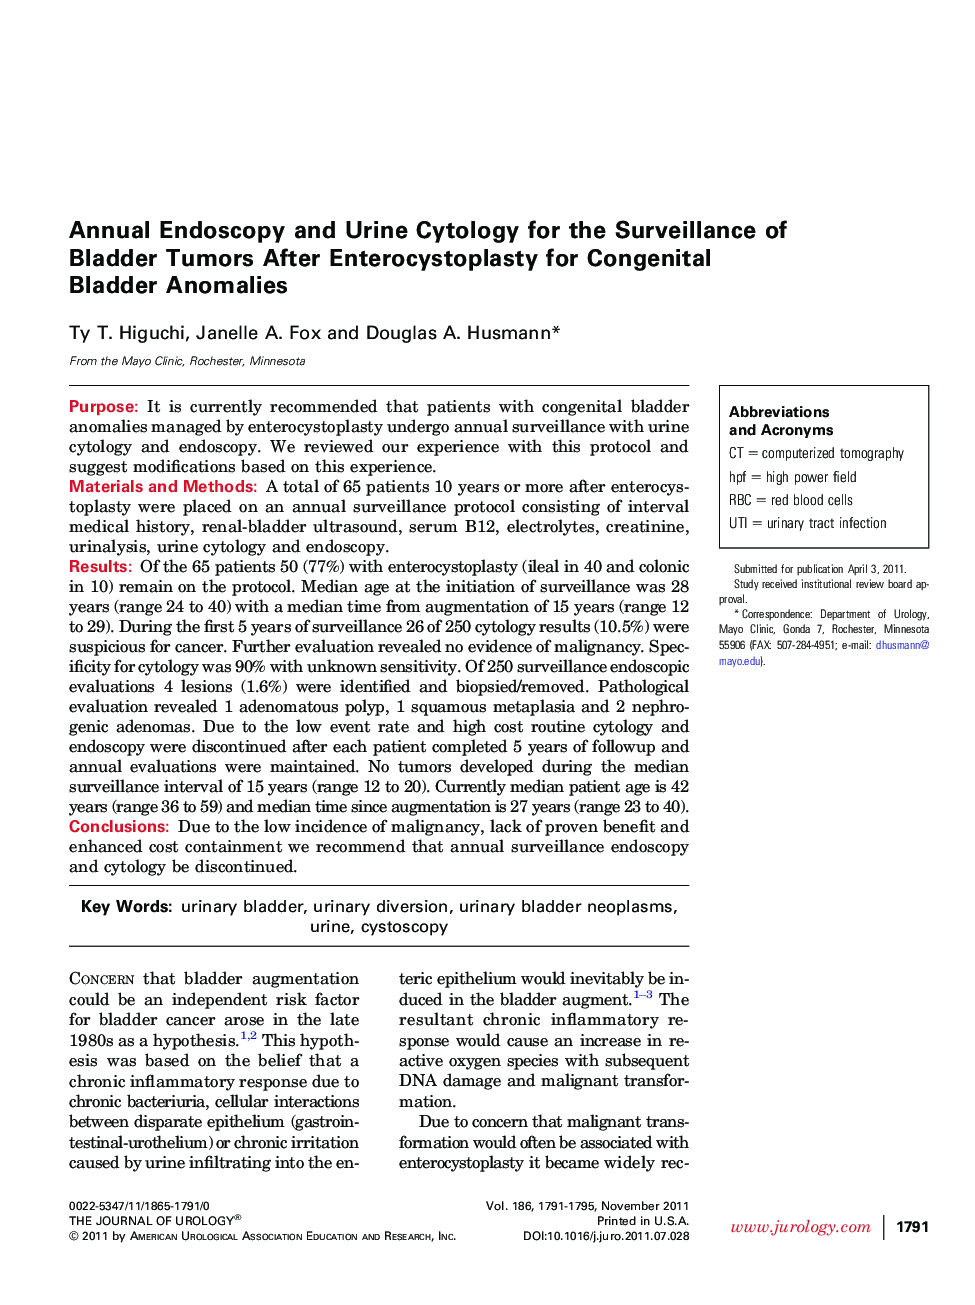 Annual Endoscopy and Urine Cytology for the Surveillance of Bladder Tumors After Enterocystoplasty for Congenital Bladder Anomalies 